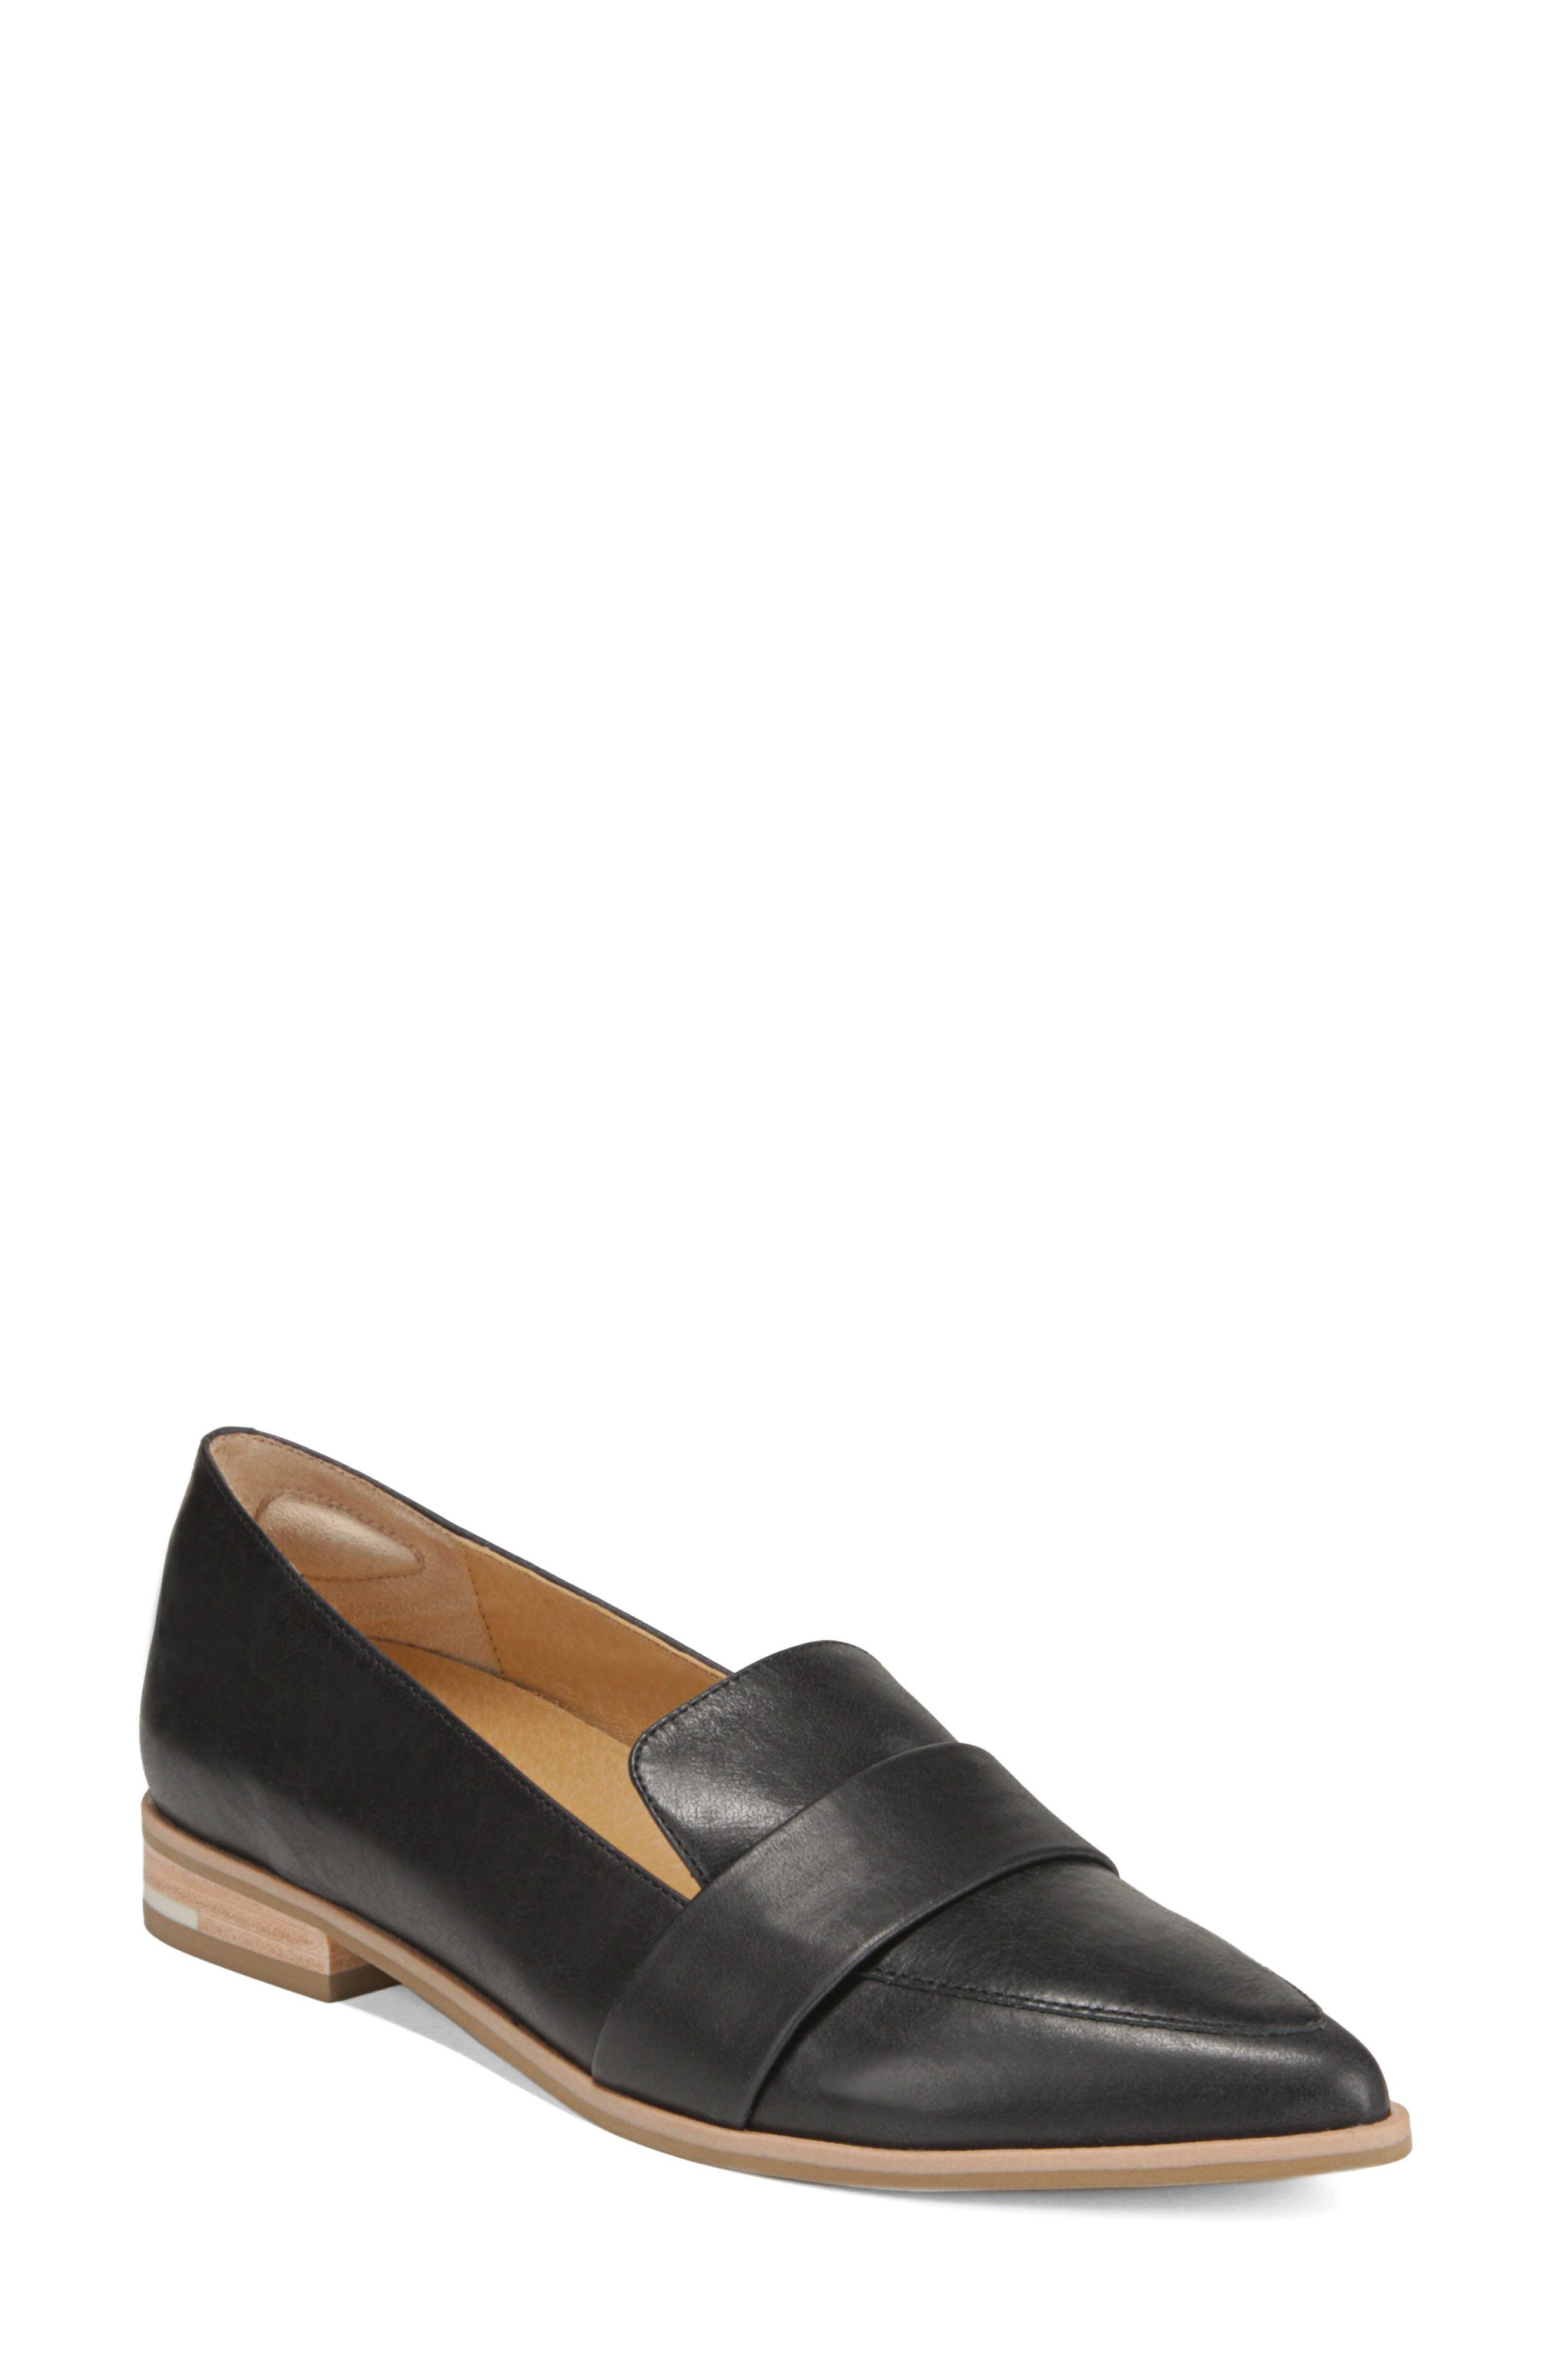 dr scholl's leather slip ons